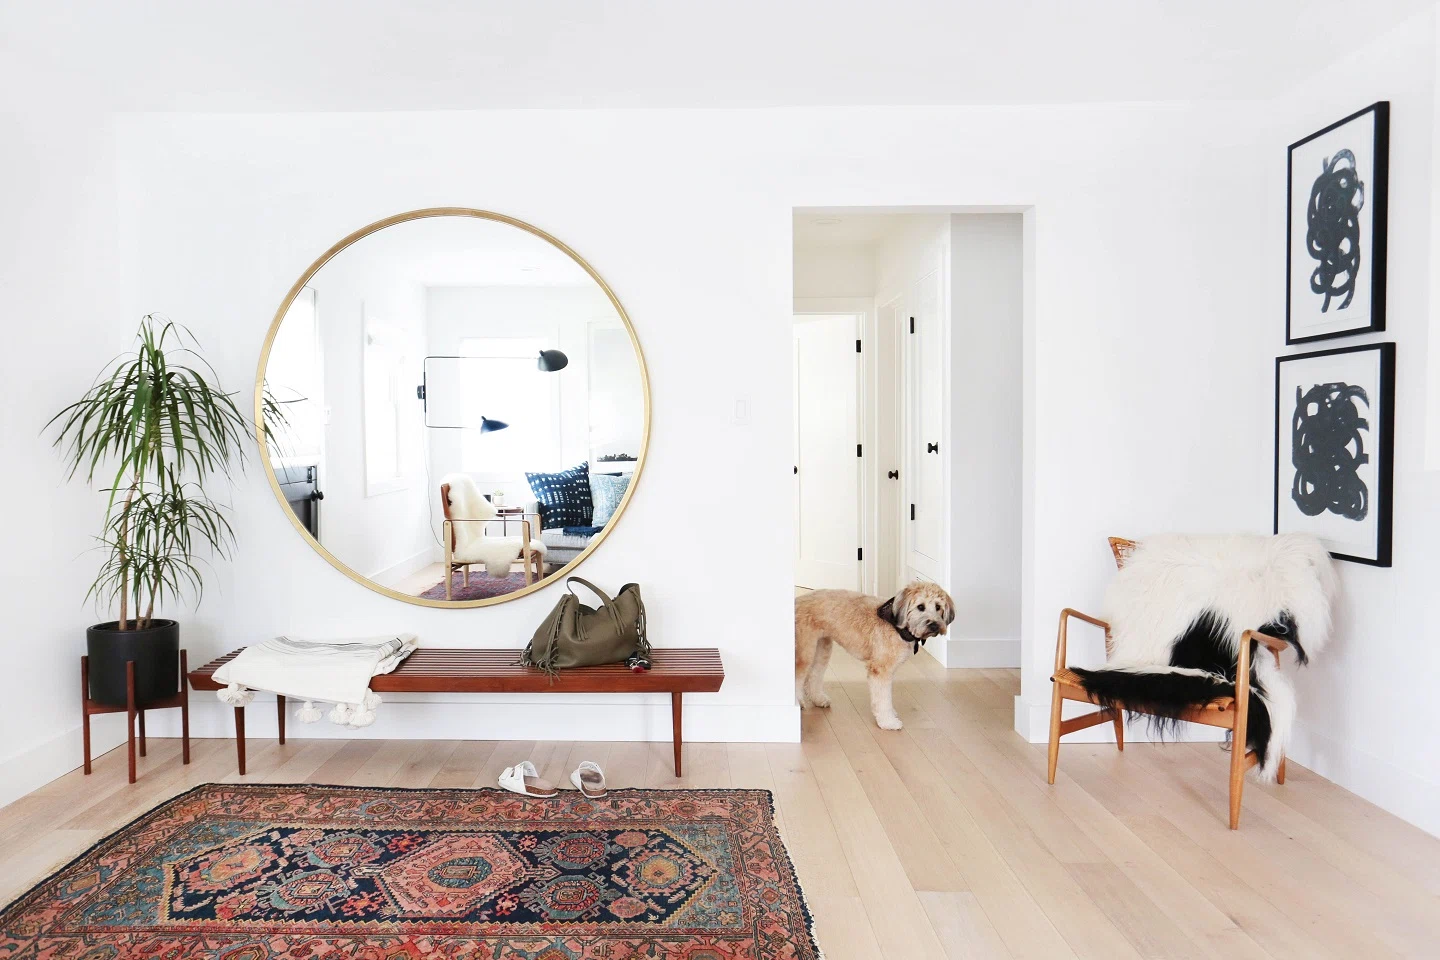 Large Mirror in Home Interior